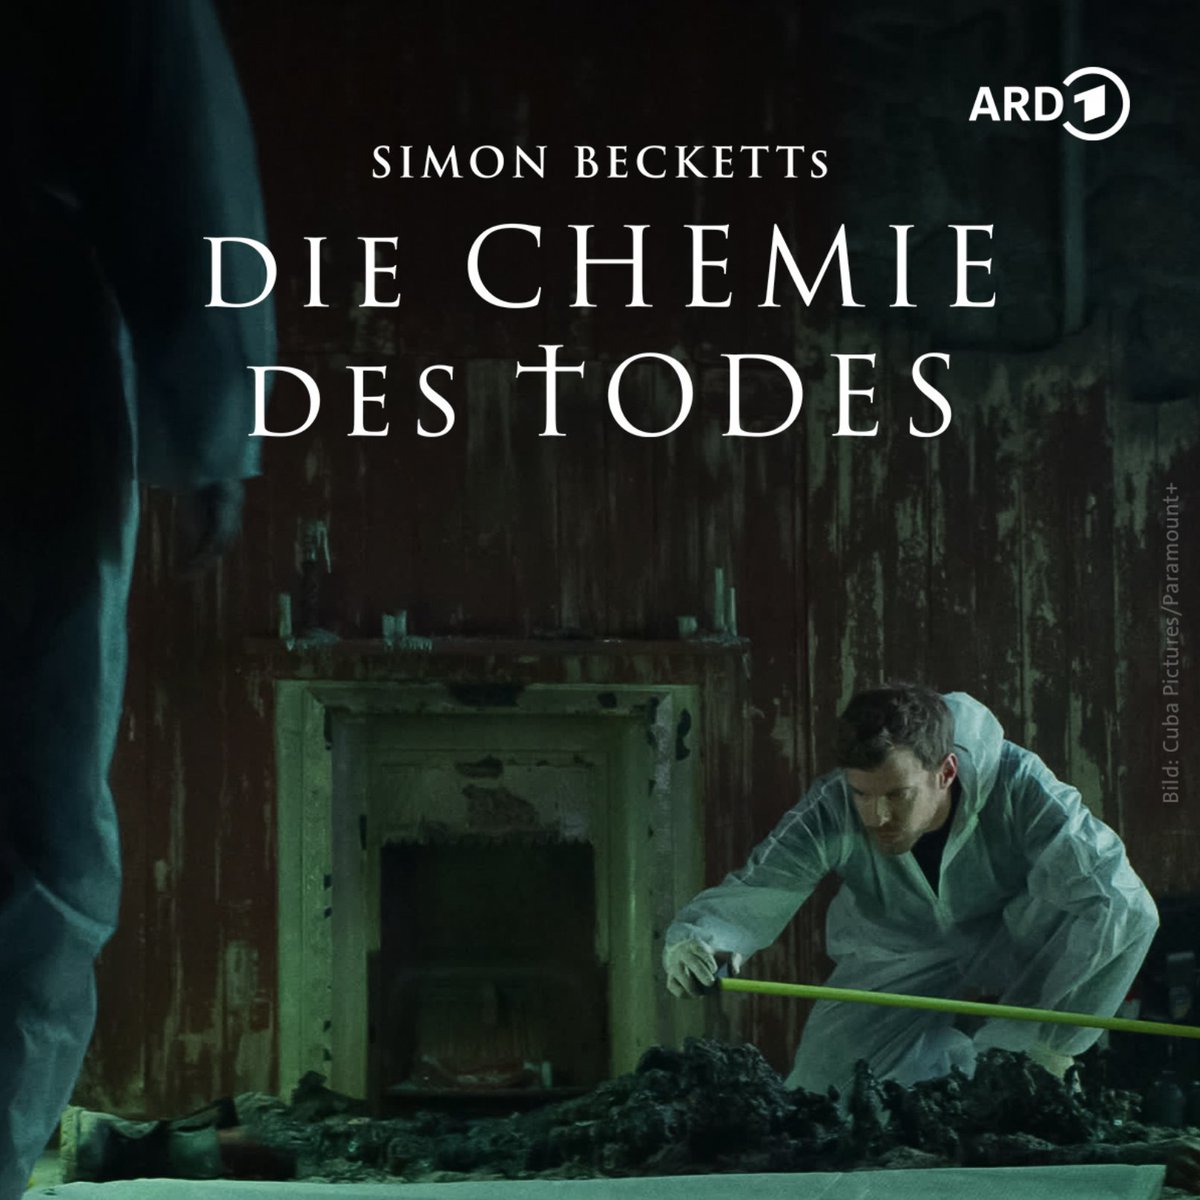 German readers: You are now able to stream all episodes of 'Die Chemie des Todes' on ARD. You can view the whole series at: 1.ard.de/die-chemie-des…… (also available in the original English language version).